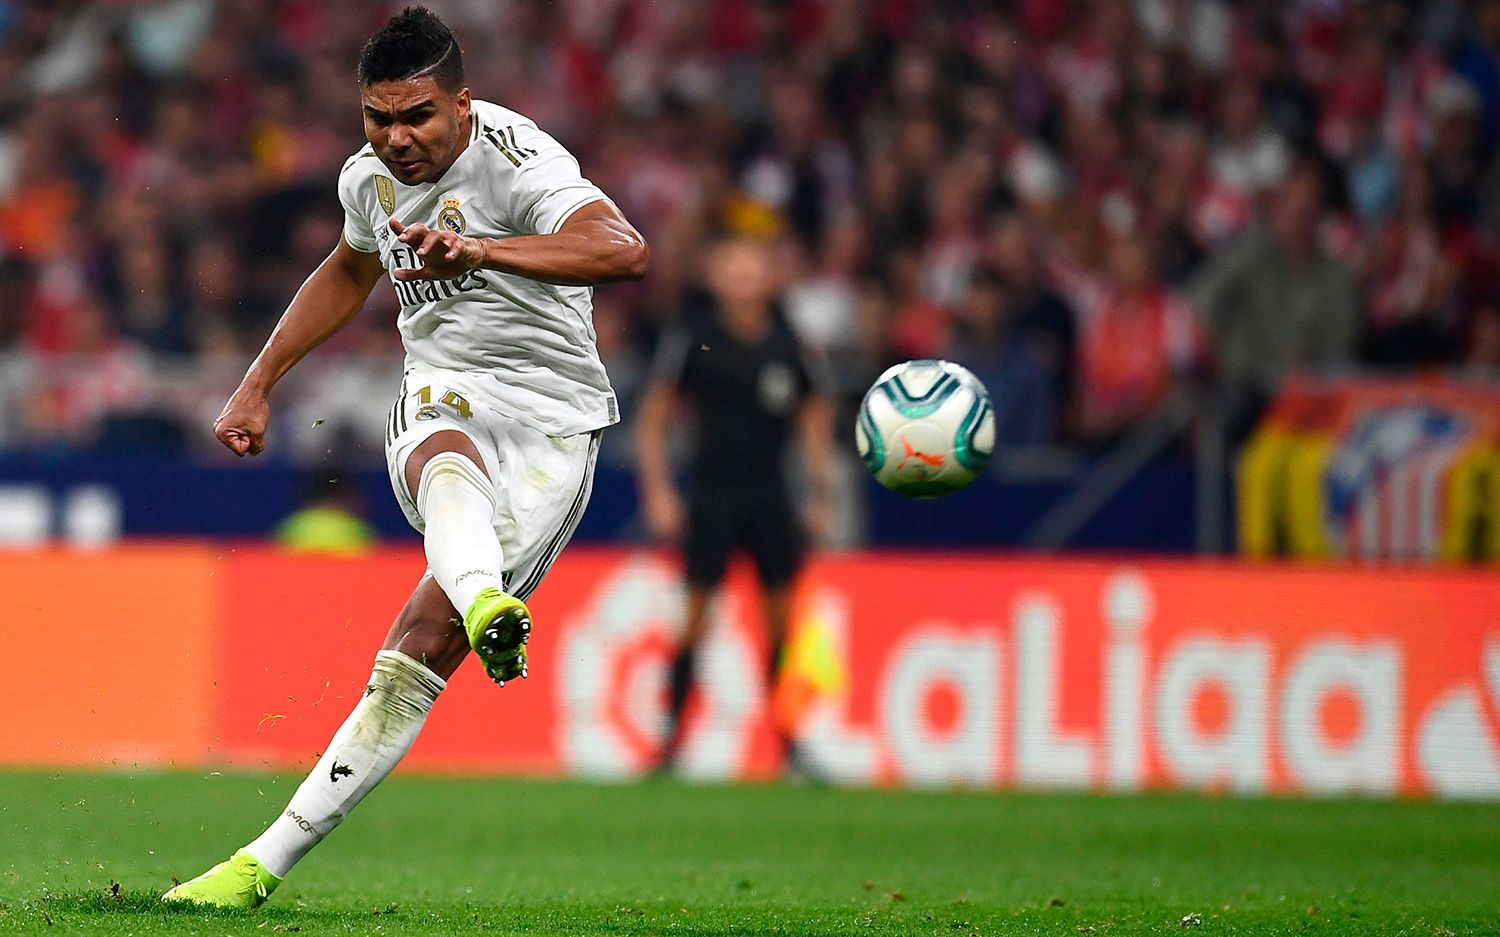 Casemiro Shoots in the Athletic-Madrid